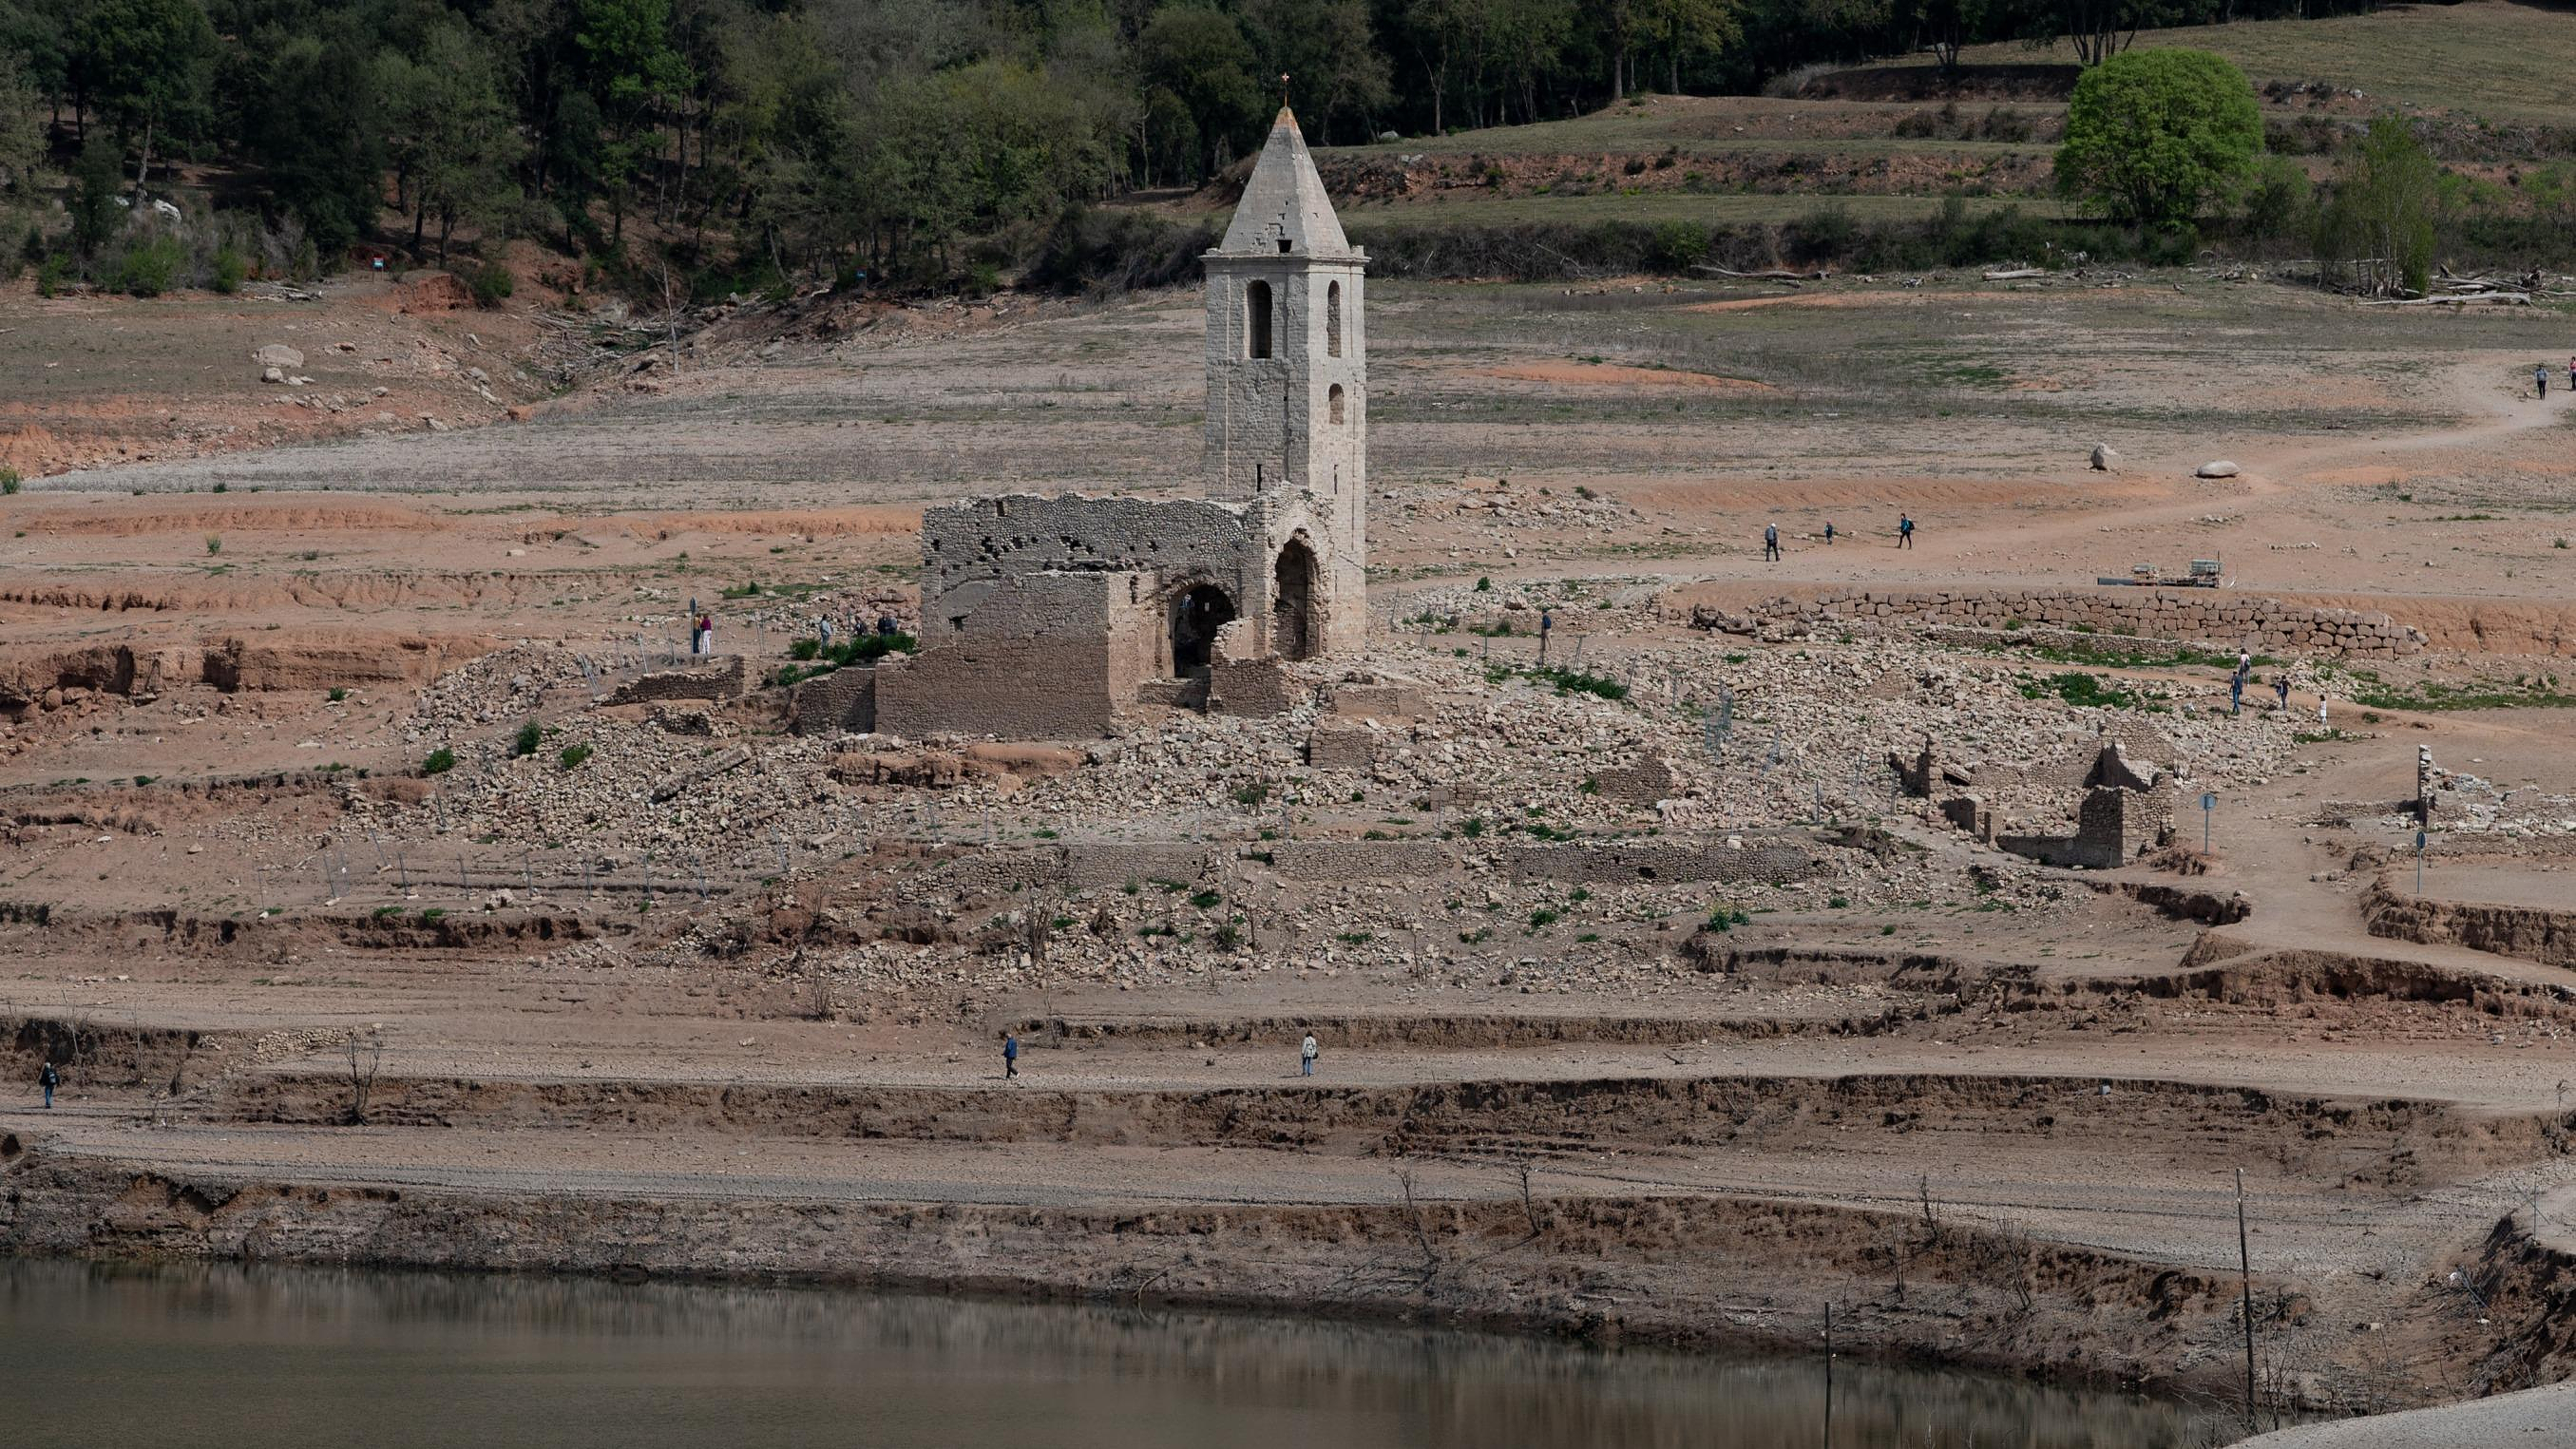 In Spain, the ruins of a village resurface due to drought